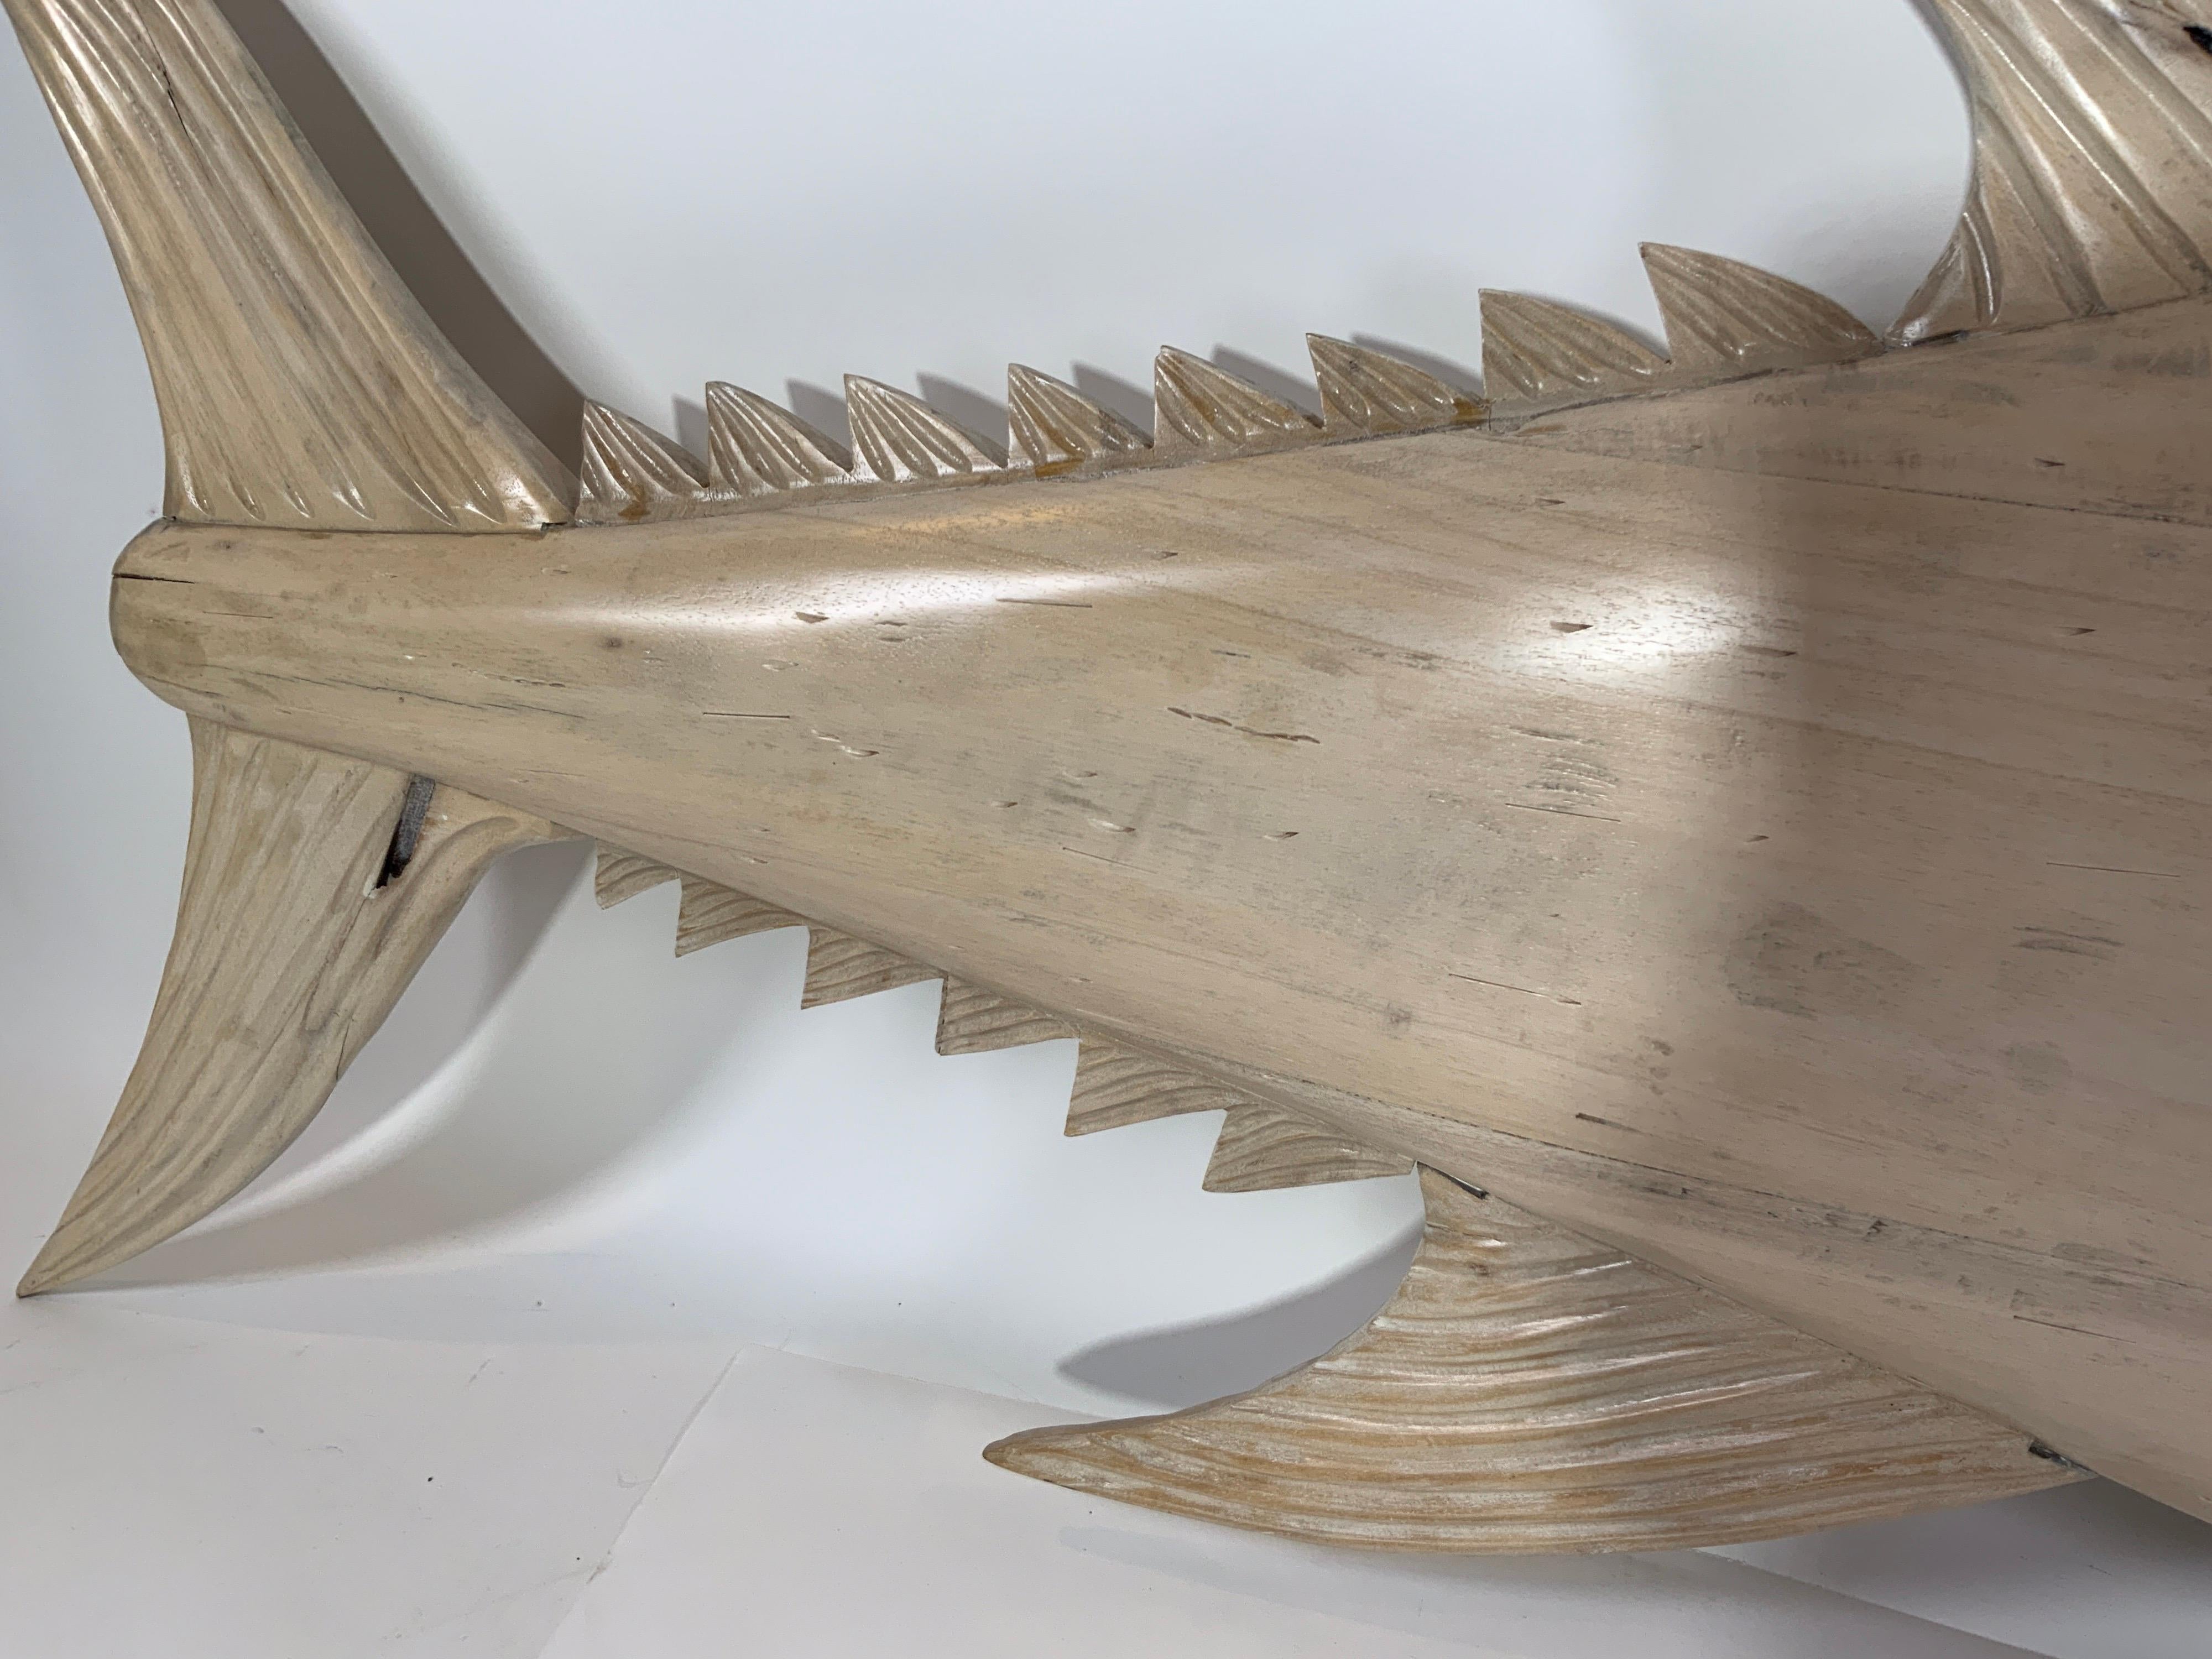 Contemporary Six Foot Carved Wood Tuna Fish For Sale